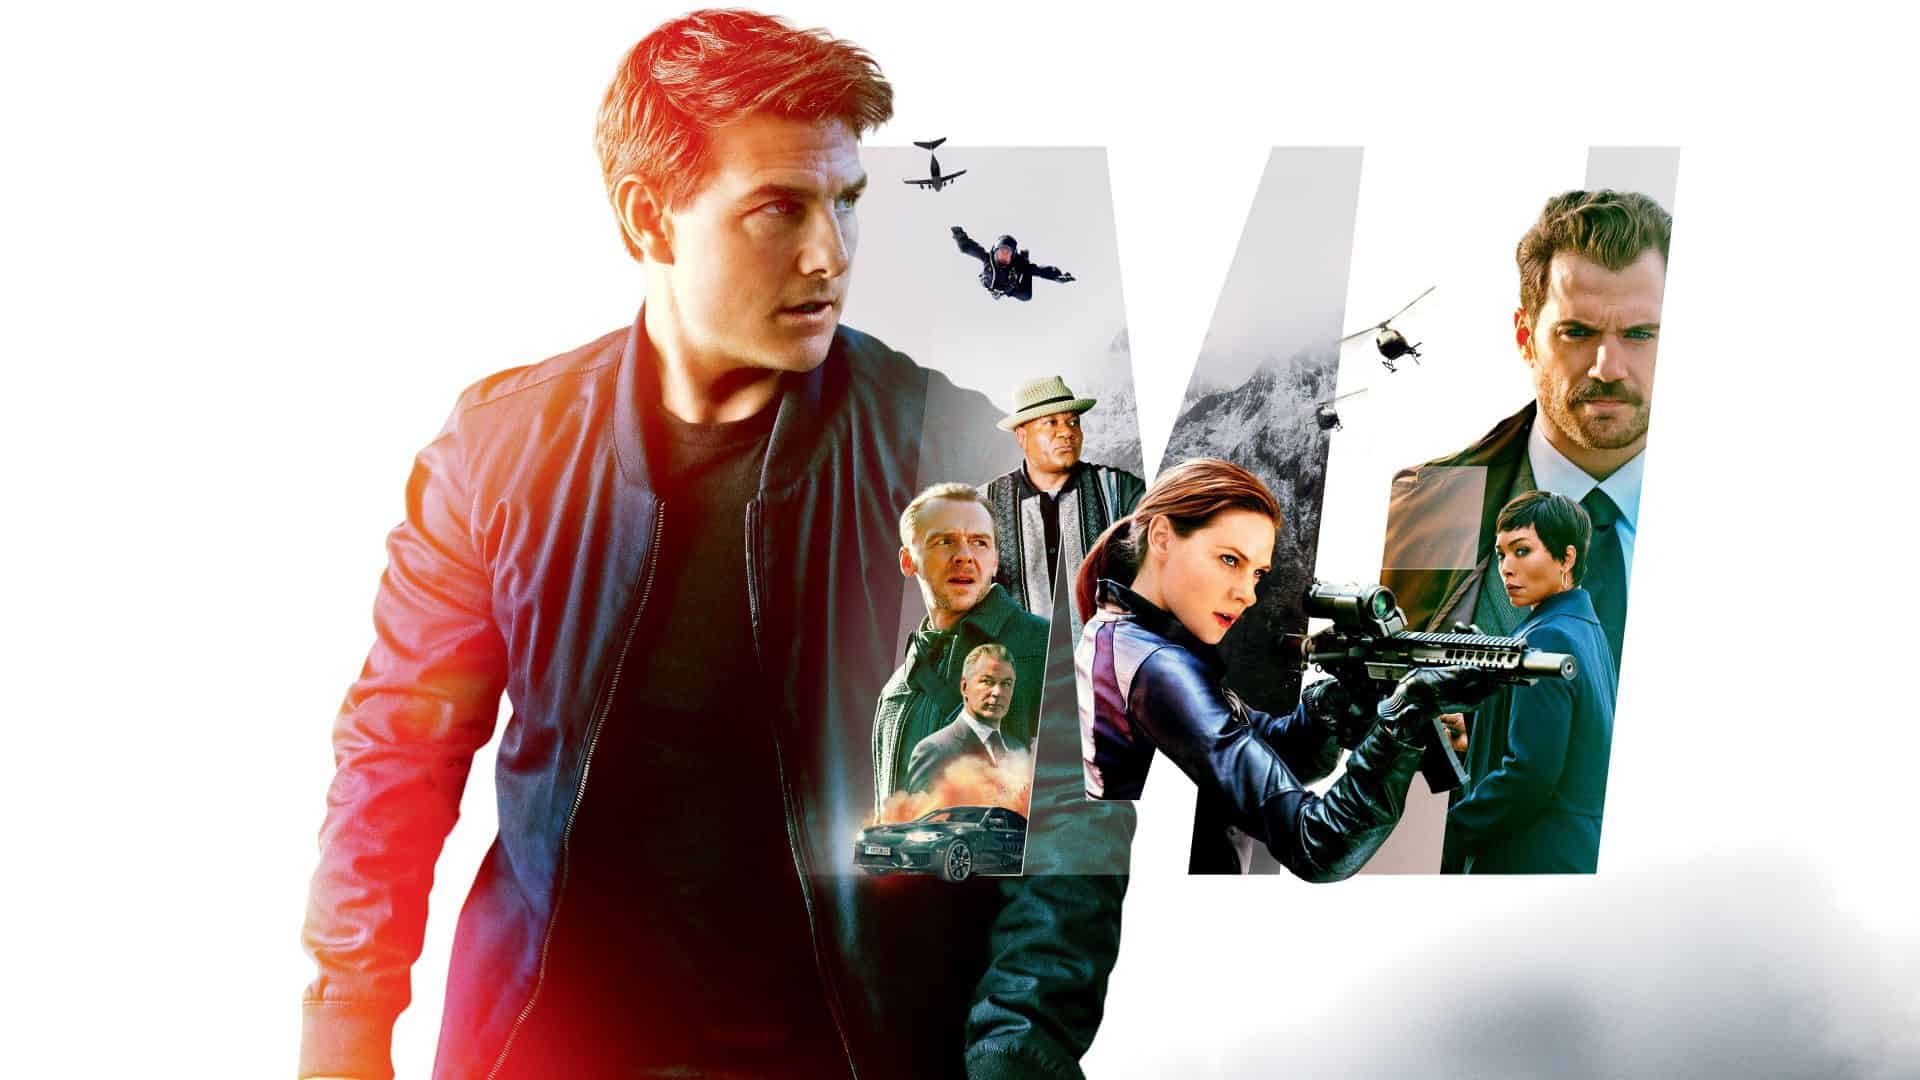 Mission Impossible - Fallout (2018) 1080p 2160p HDR Bluray Download